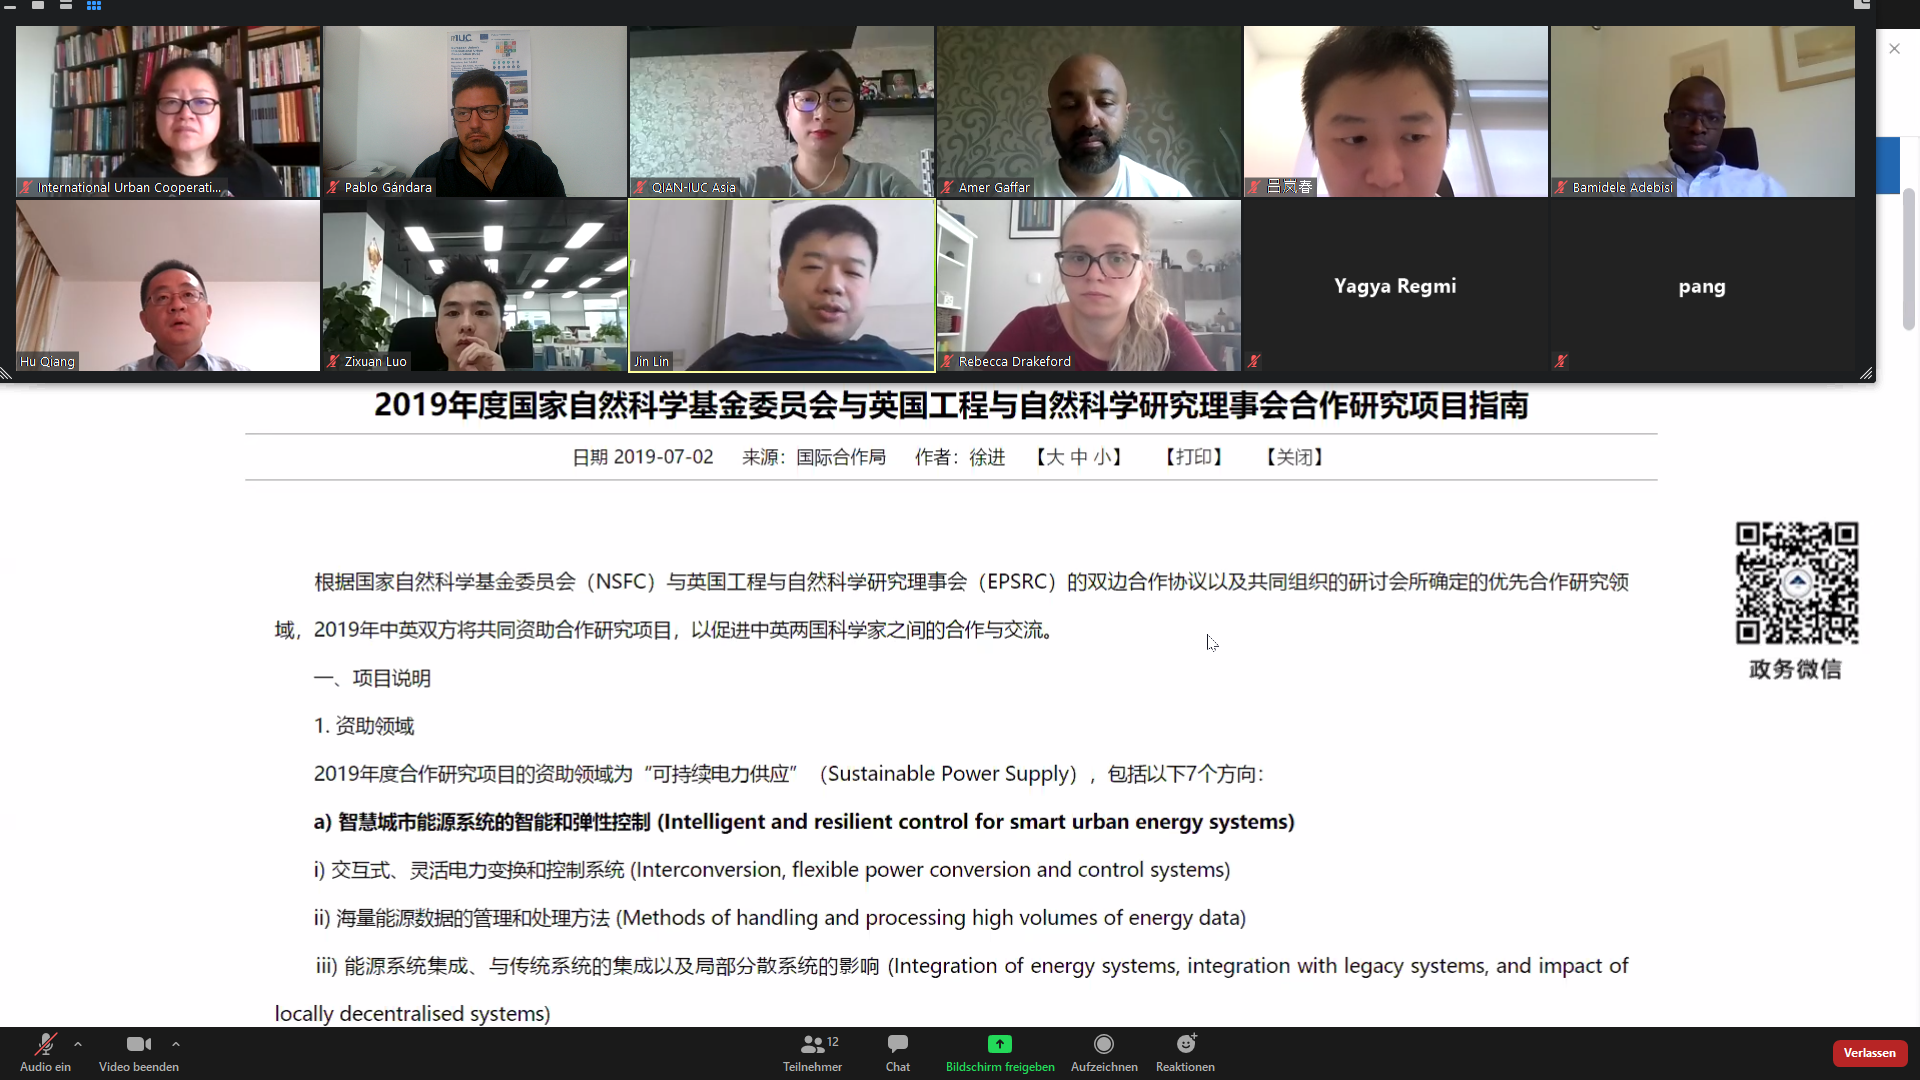 Greater Manchester – Chengdu Online Discussion on Smart Energy and Clean Tech